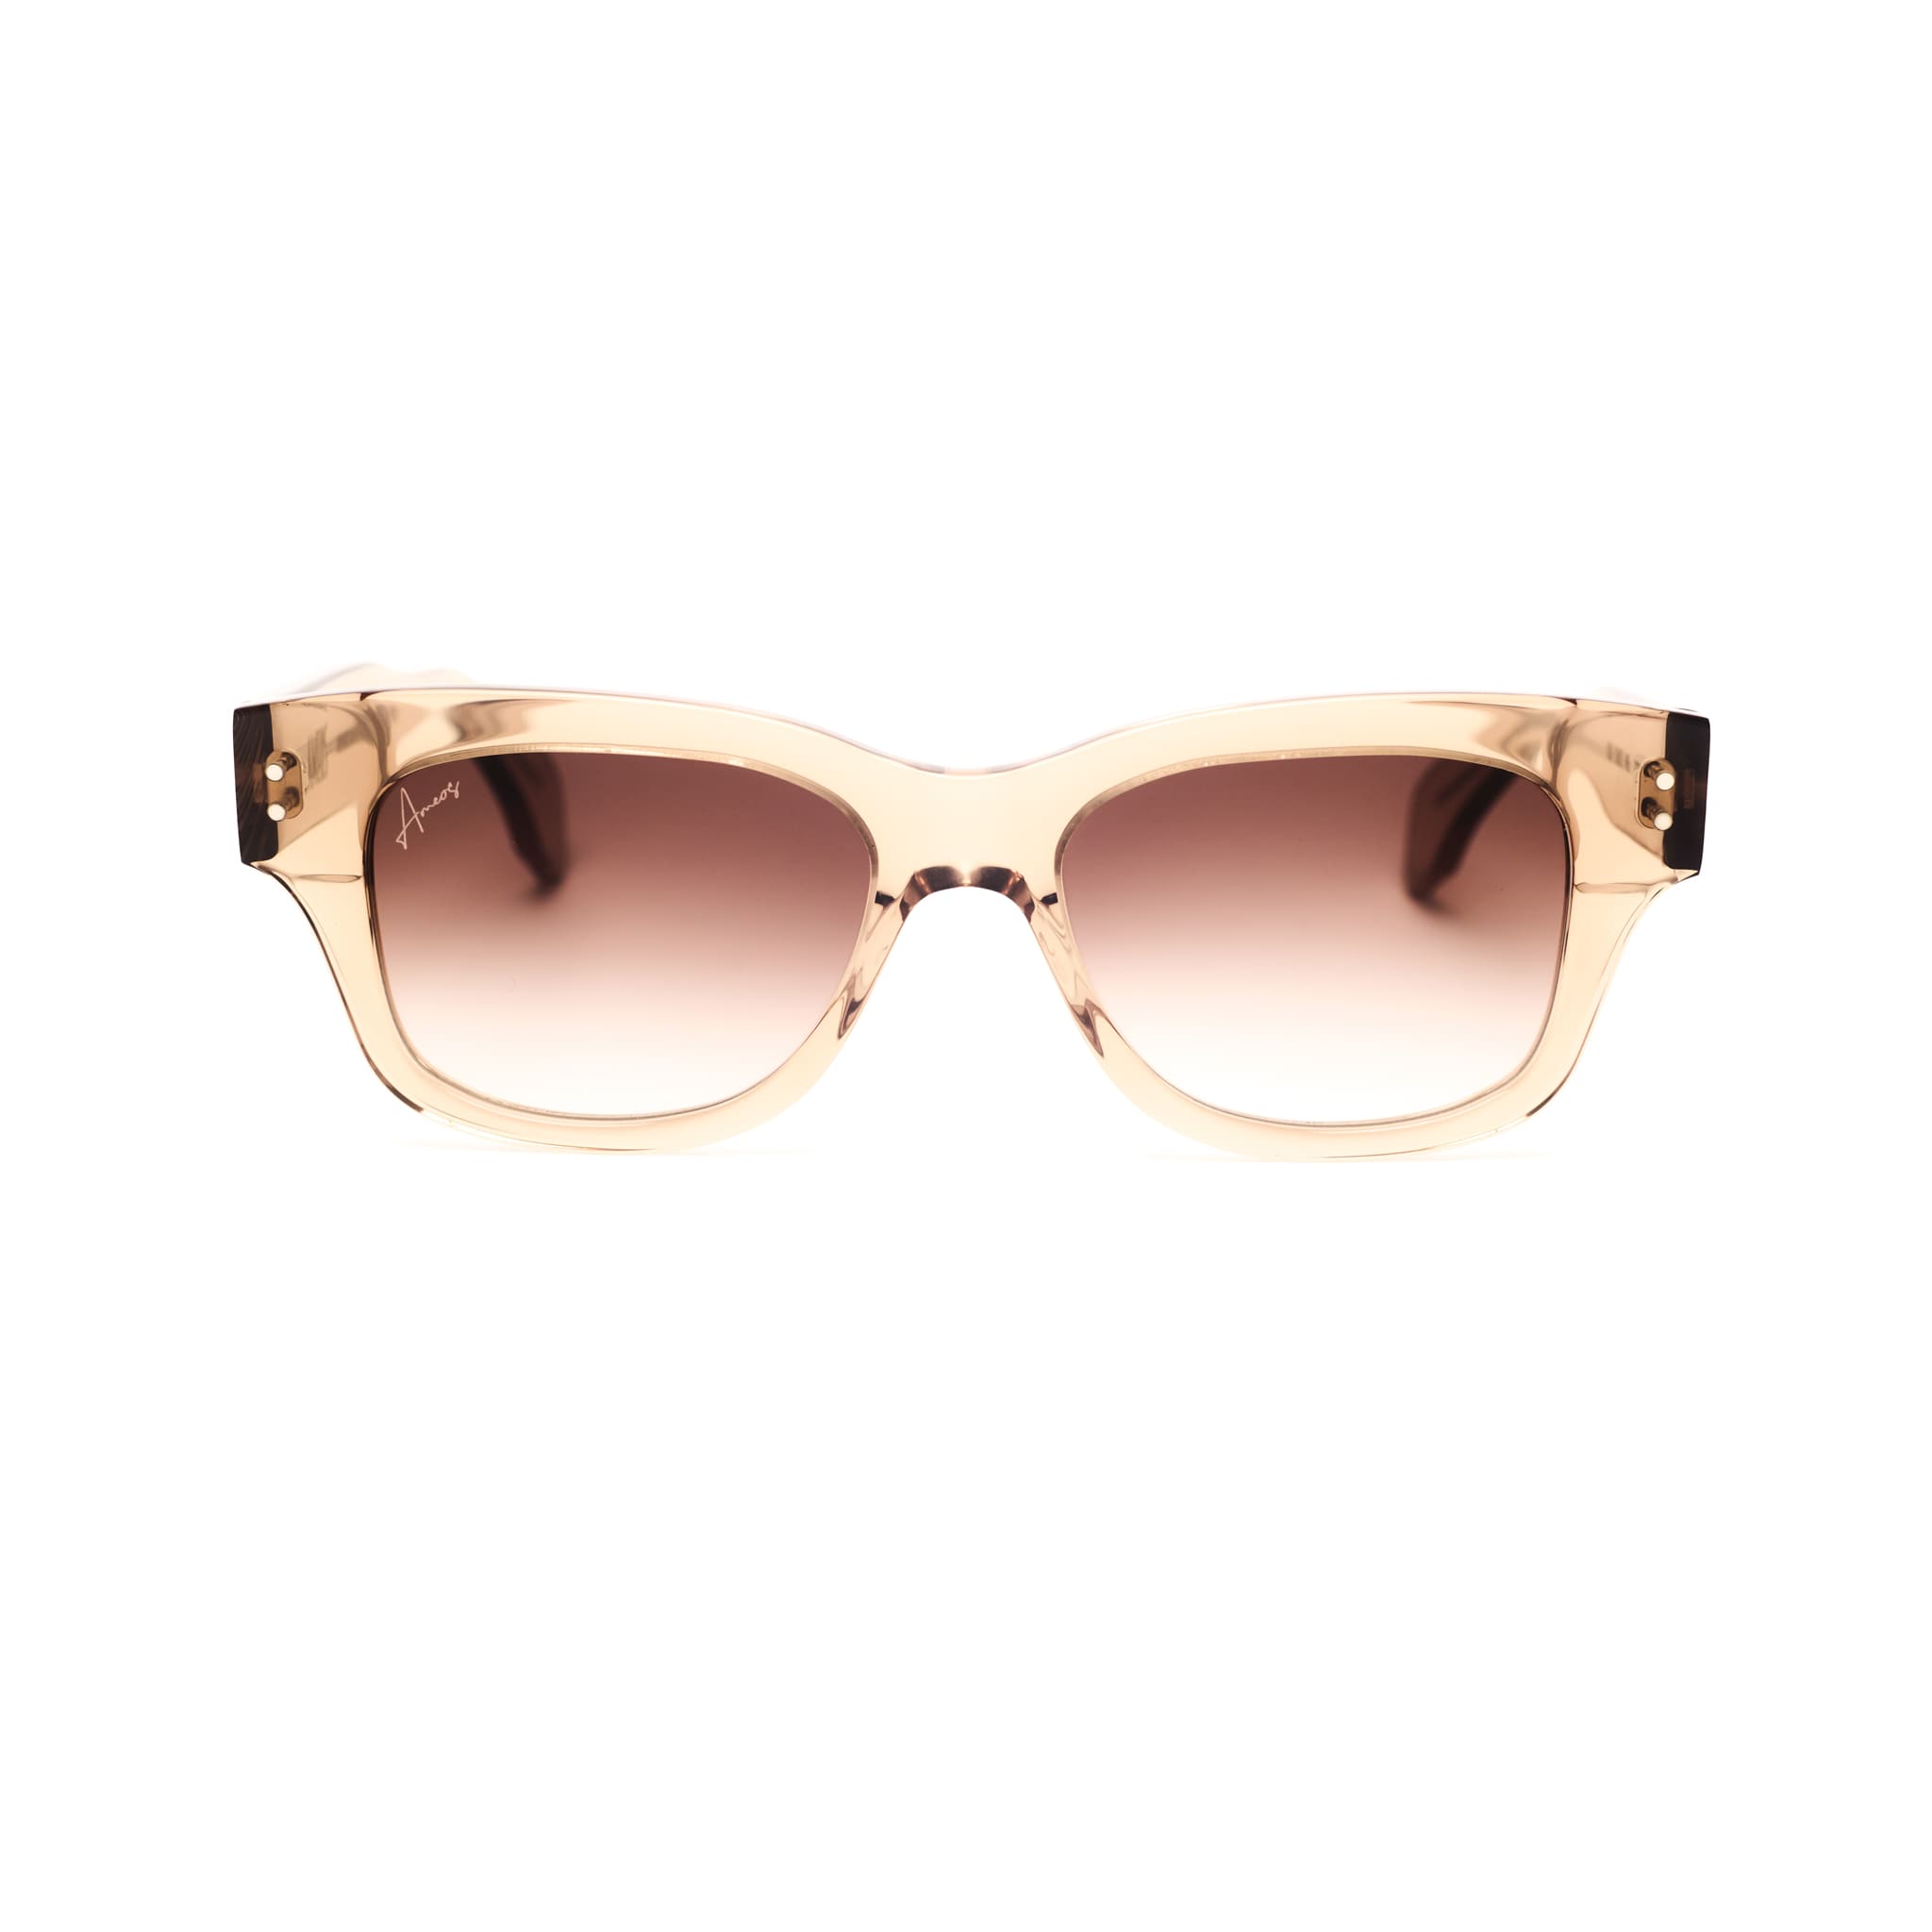 Ameos Forever collection Lou model. Beige transparent frames with brown lenses. Front view. Genderless, gender neutral eyewear